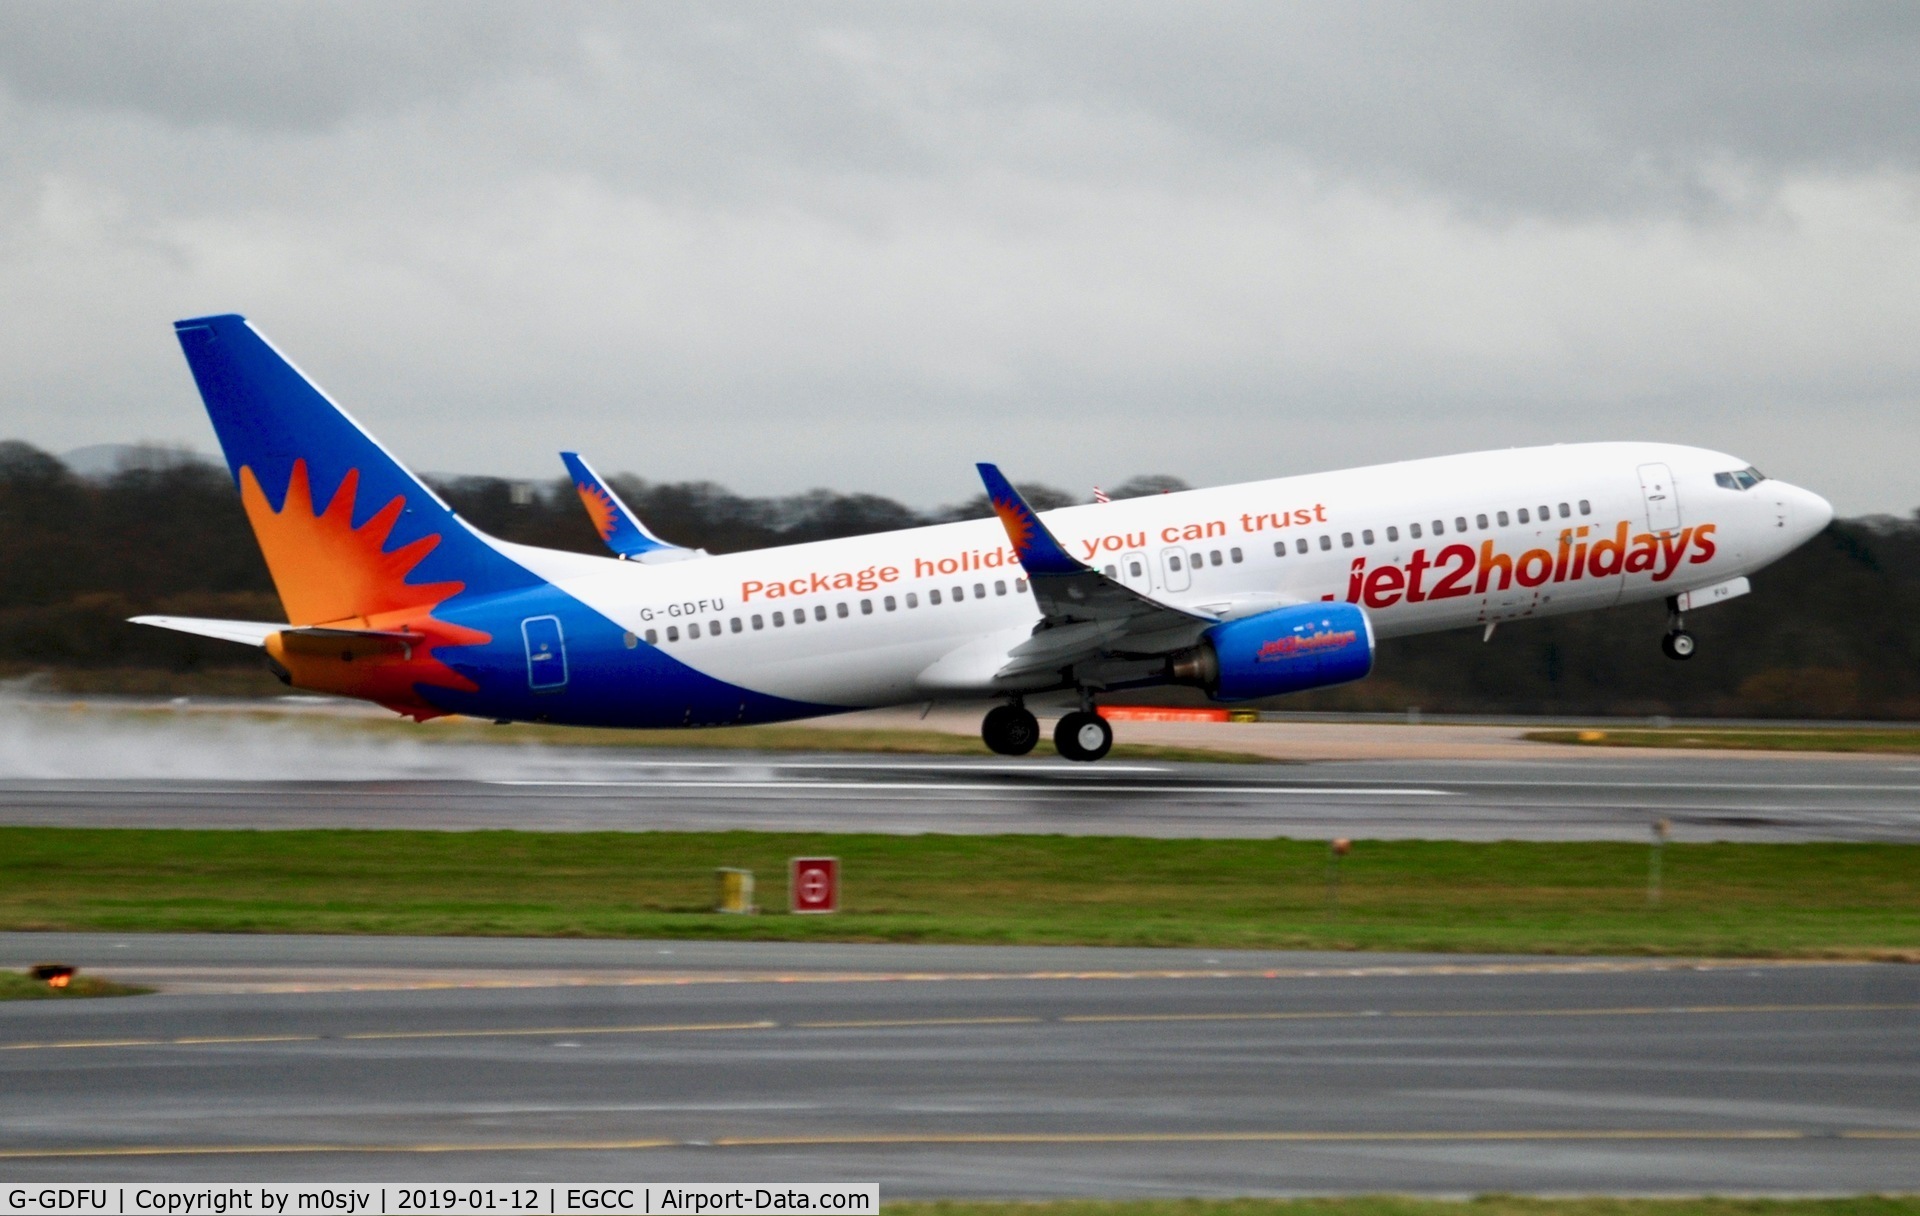 G-GDFU, 2001 Boeing 737-8K5 C/N 30416, Taken From RVP on a Cold and Damp Saturday